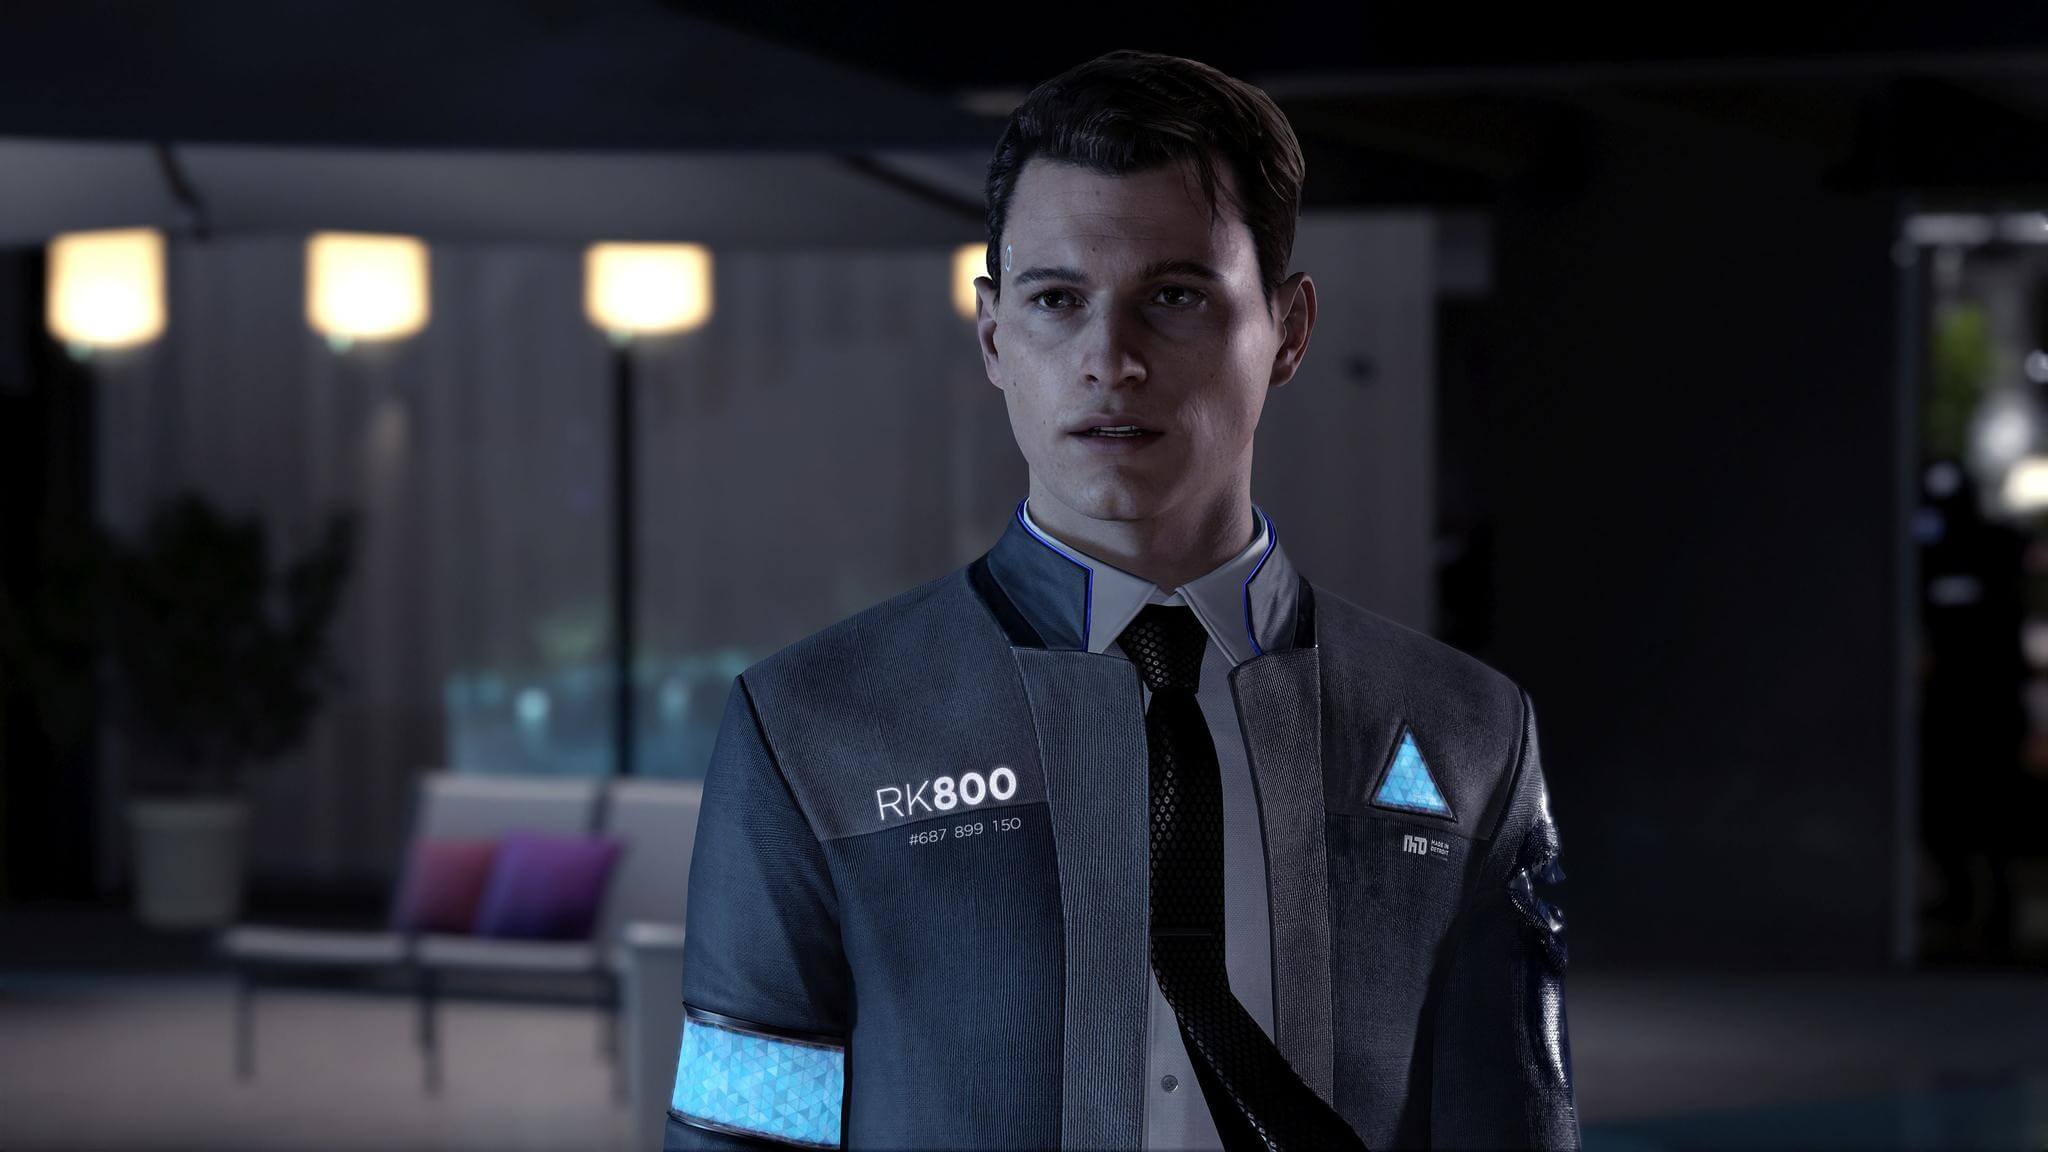 Detroit: Become Human coming to Epic Games Store, GTX 1080 recommended